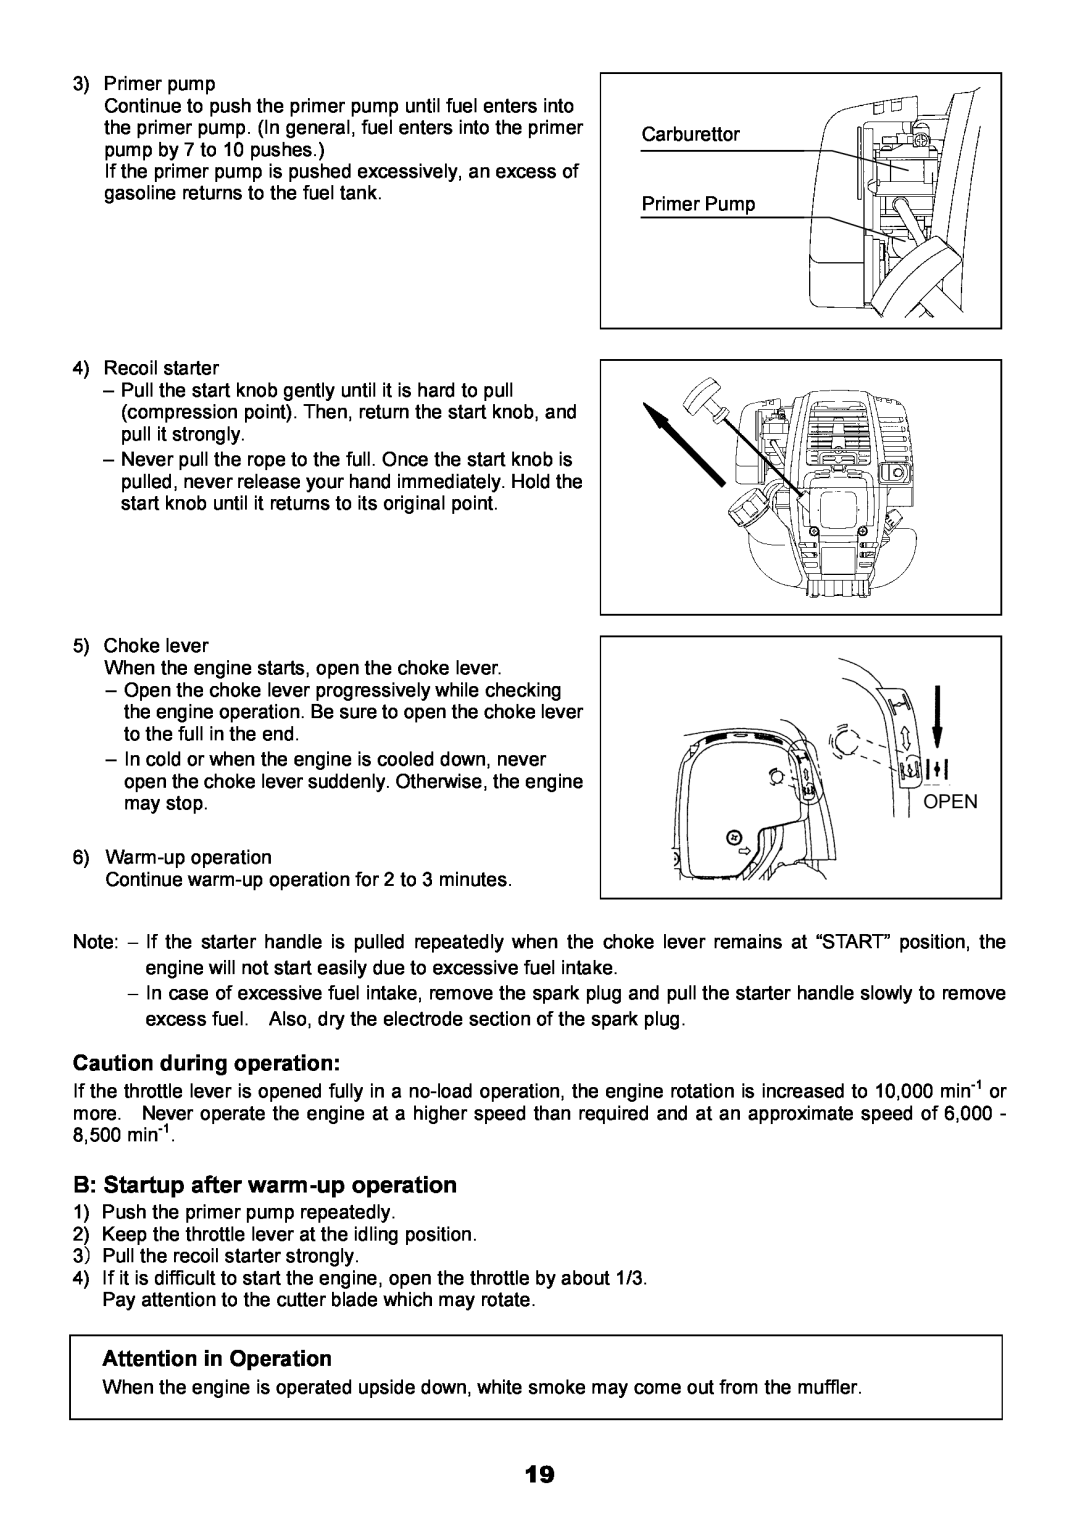 Makita EBH340U instruction manual B Startup after warm-up operation, Caution during operation, Attention in Operation 